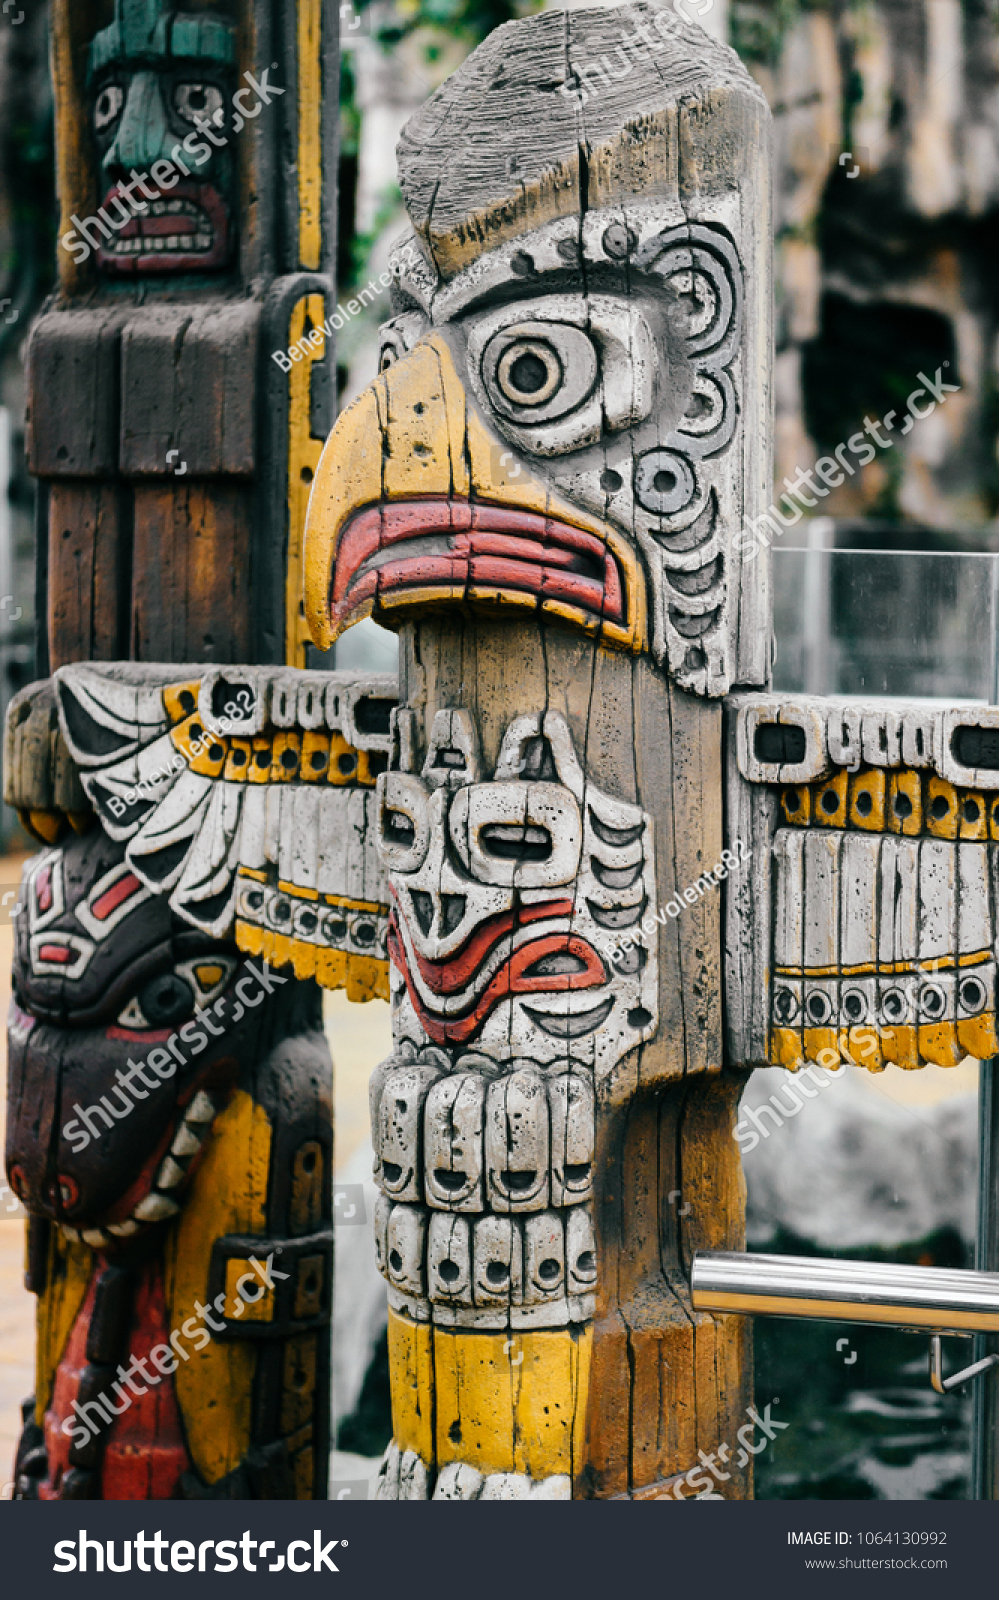 Traditional national indian totem.  Totem pole sculpture art. Ancient wooden mask.  Mayan and aztecs symbolic religious gods faces.  Ethnic pagan worship and idolatry. #1064130992